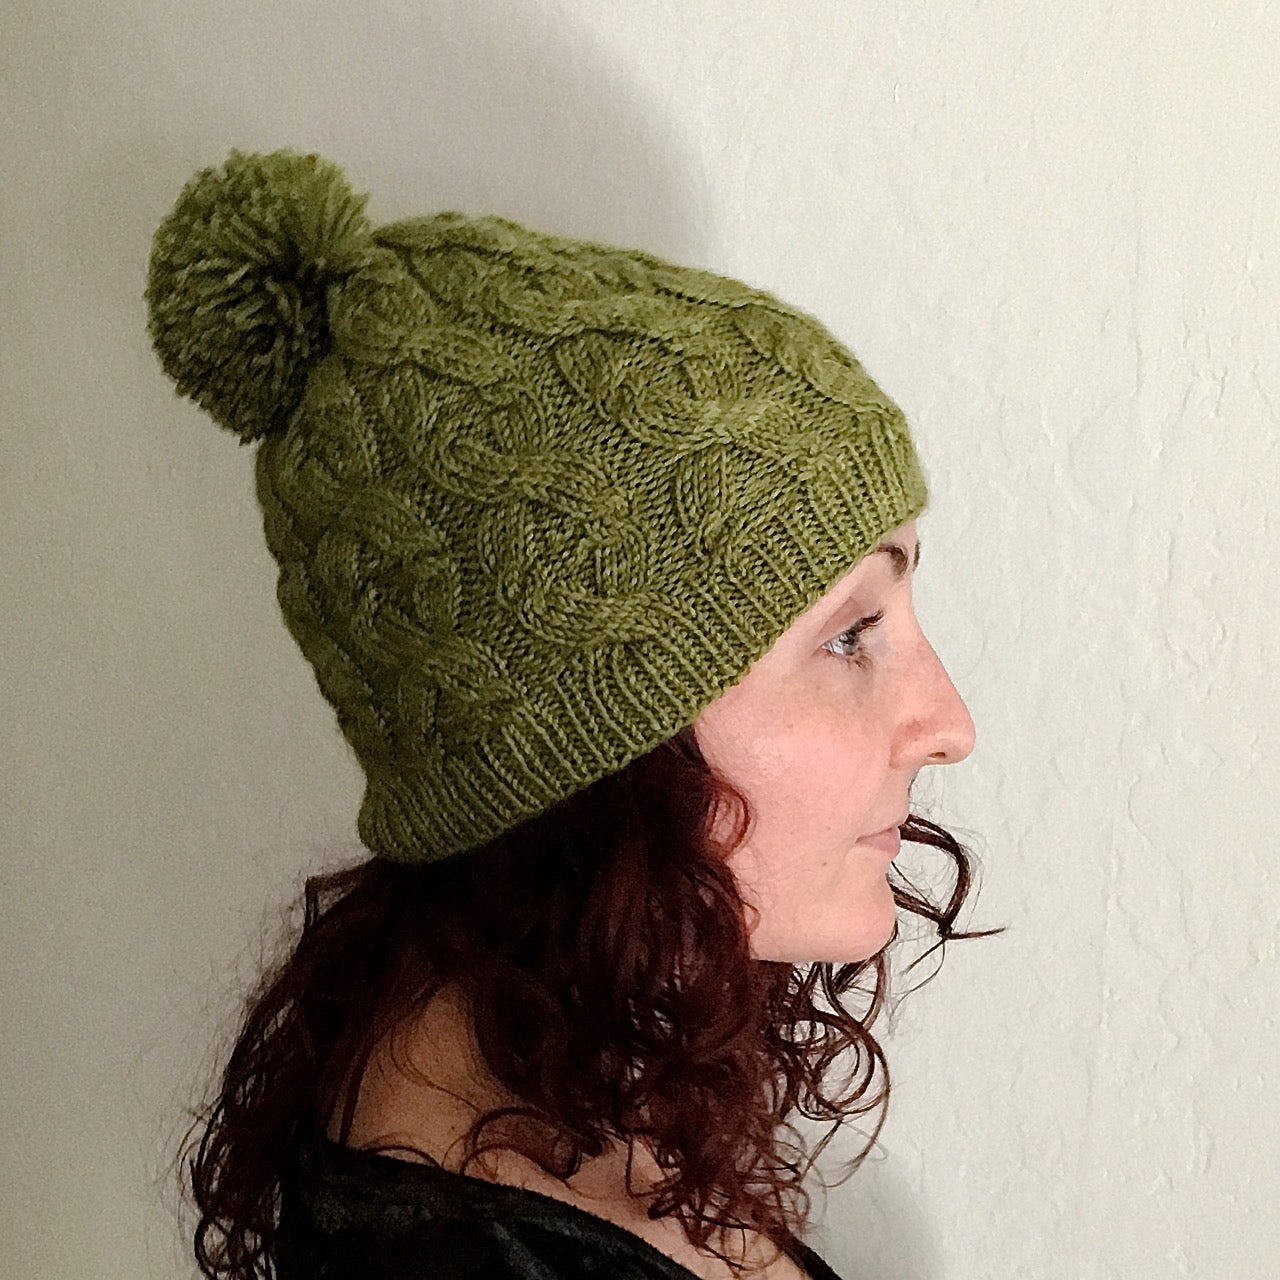 Sultana Cabled Hat - PDF Knitting Pattern